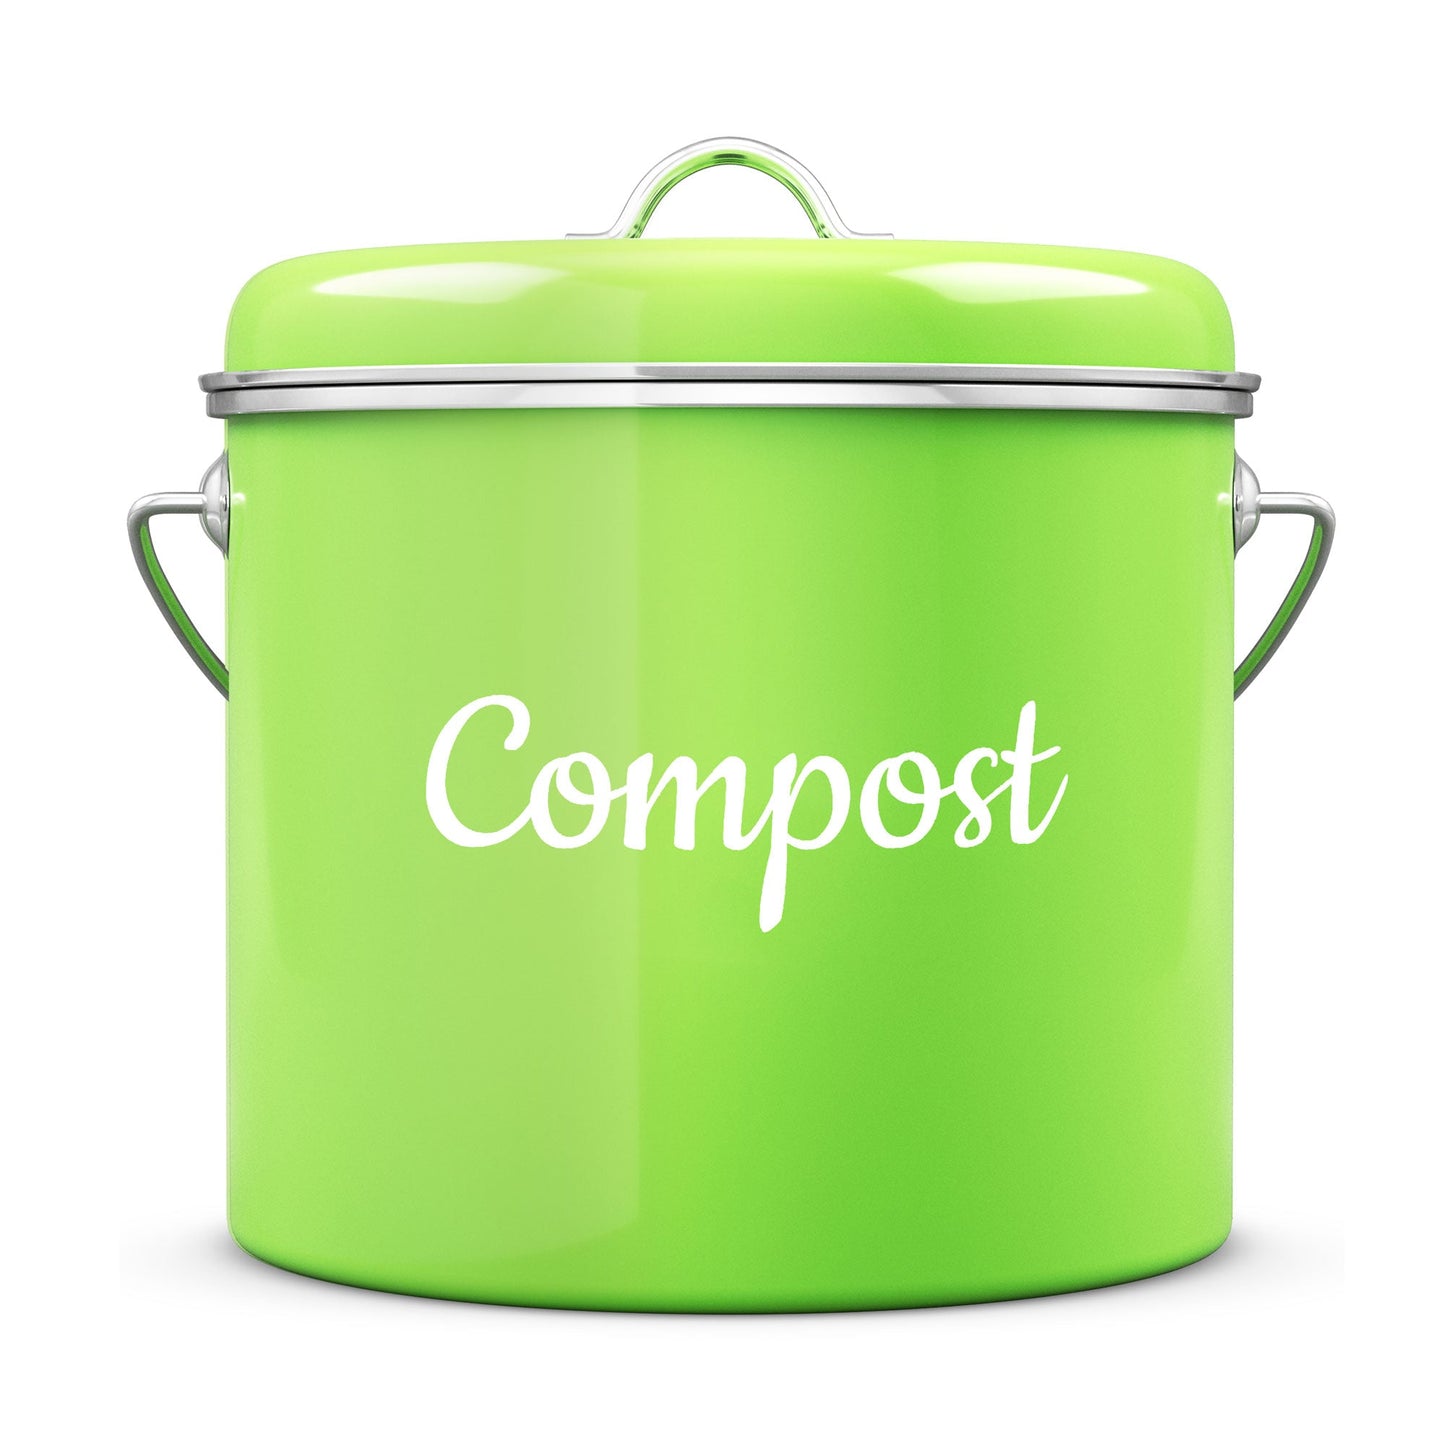 Kitchen Compost Bin for Countertop & Indoor Use - Odorless Composting Bin  with Lid, Small to Large Food Waste Bucket - Eco-Friendly Organic Waste